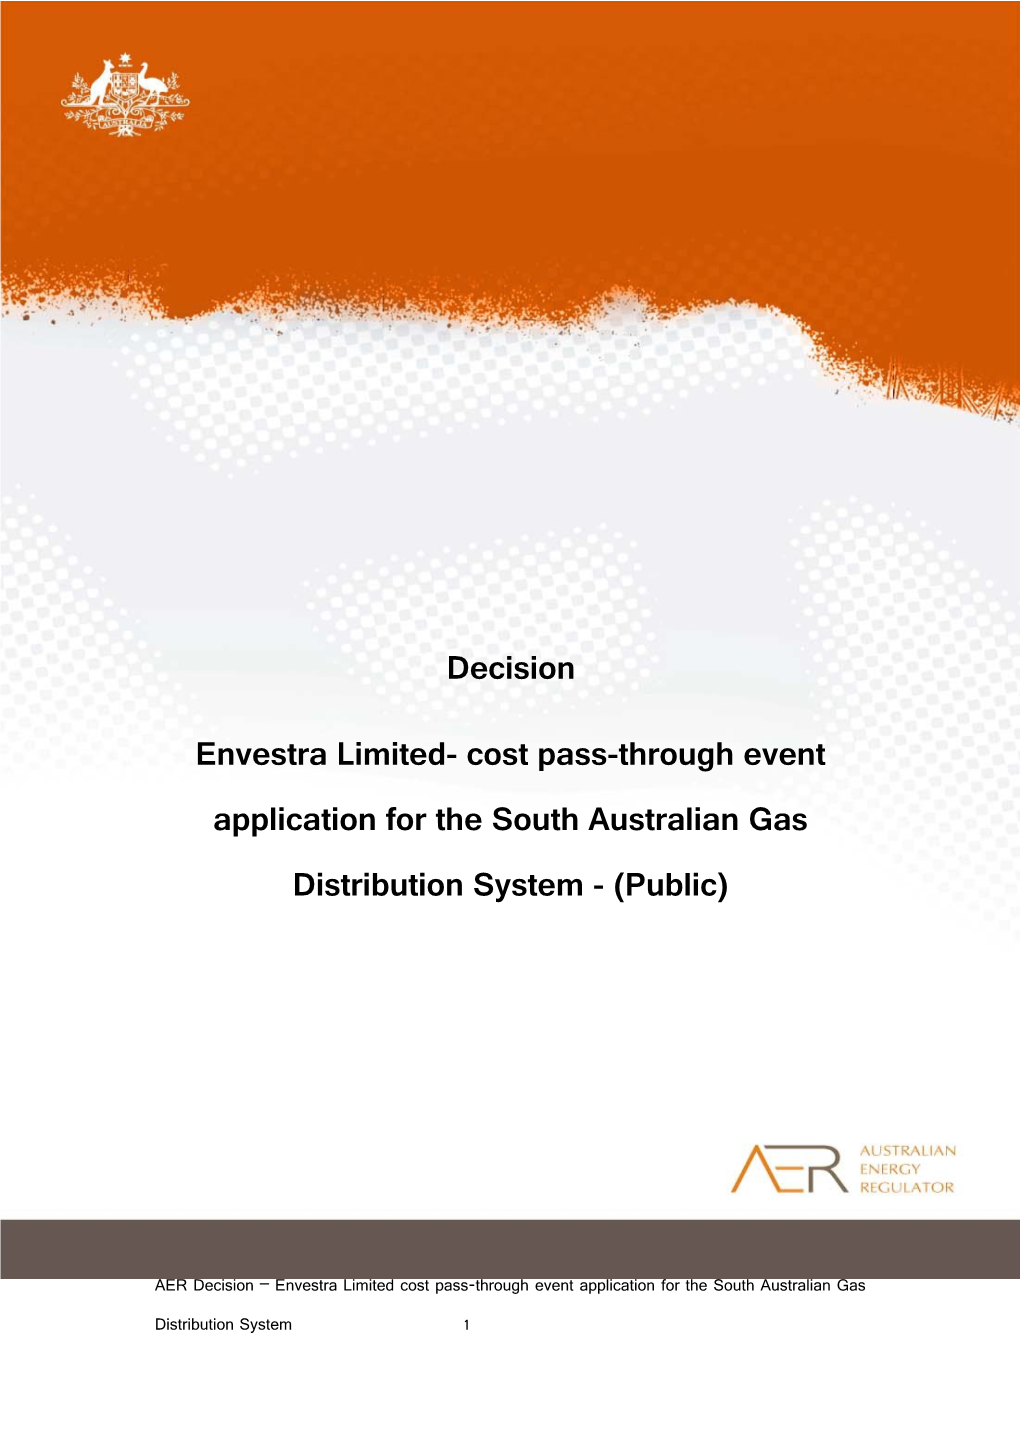 Envestra Limited- Cost Pass-Throughevent Application for the South Australian Gas Distribution